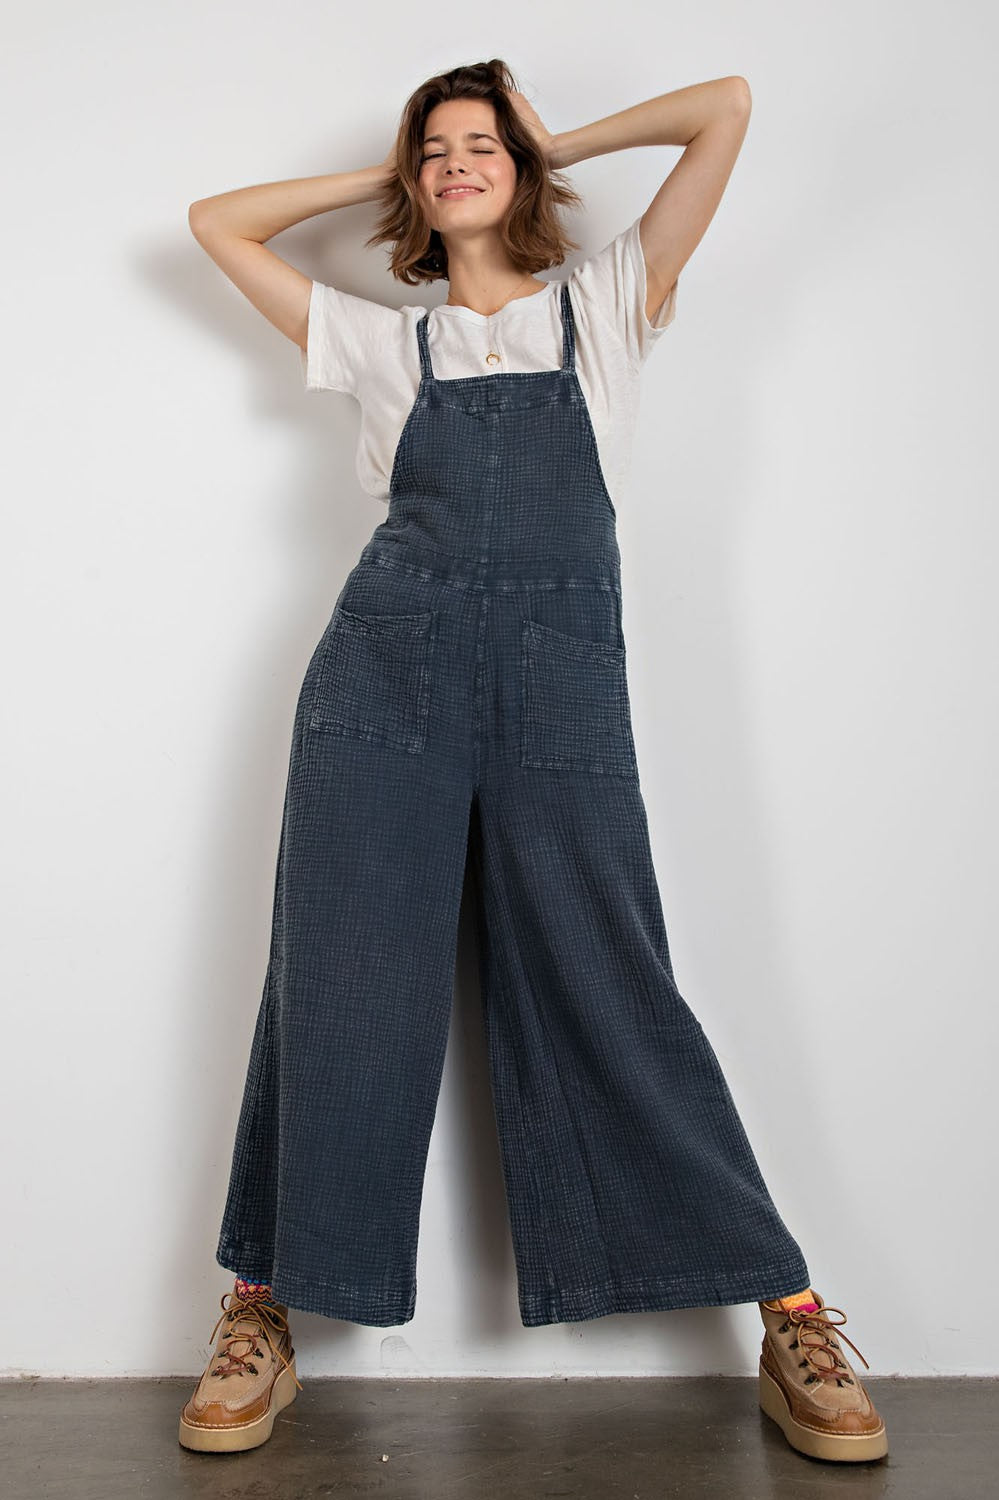 Easel Washed Cotton  Jumpsuit/Overalls in Faded Denim Overalls Easel   